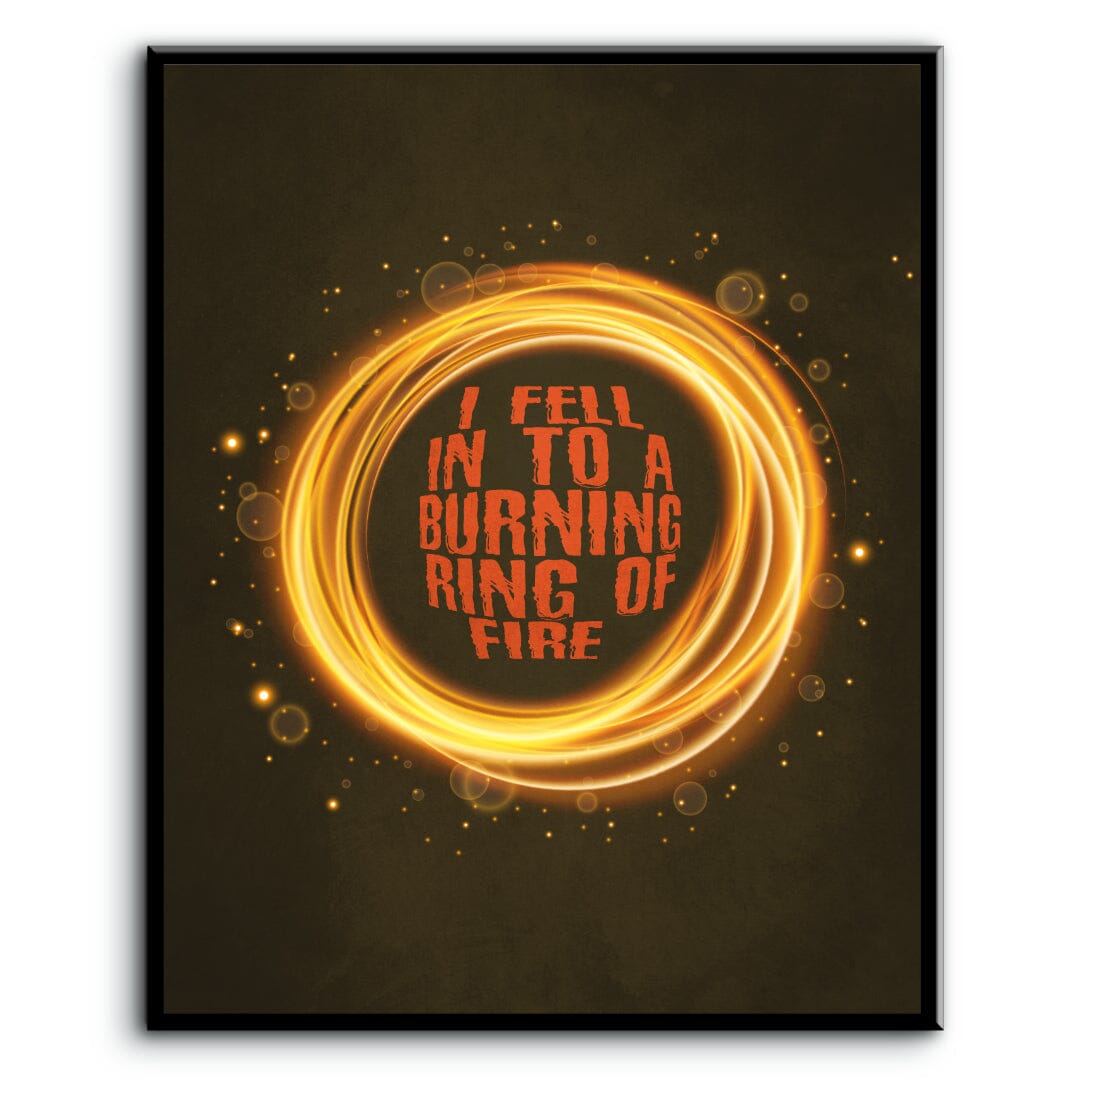 Ring of Fire by Johnny Cash - Country Music Song Lyrics Art Song Lyrics Art Song Lyrics Art 8x10 Plaque Mount 